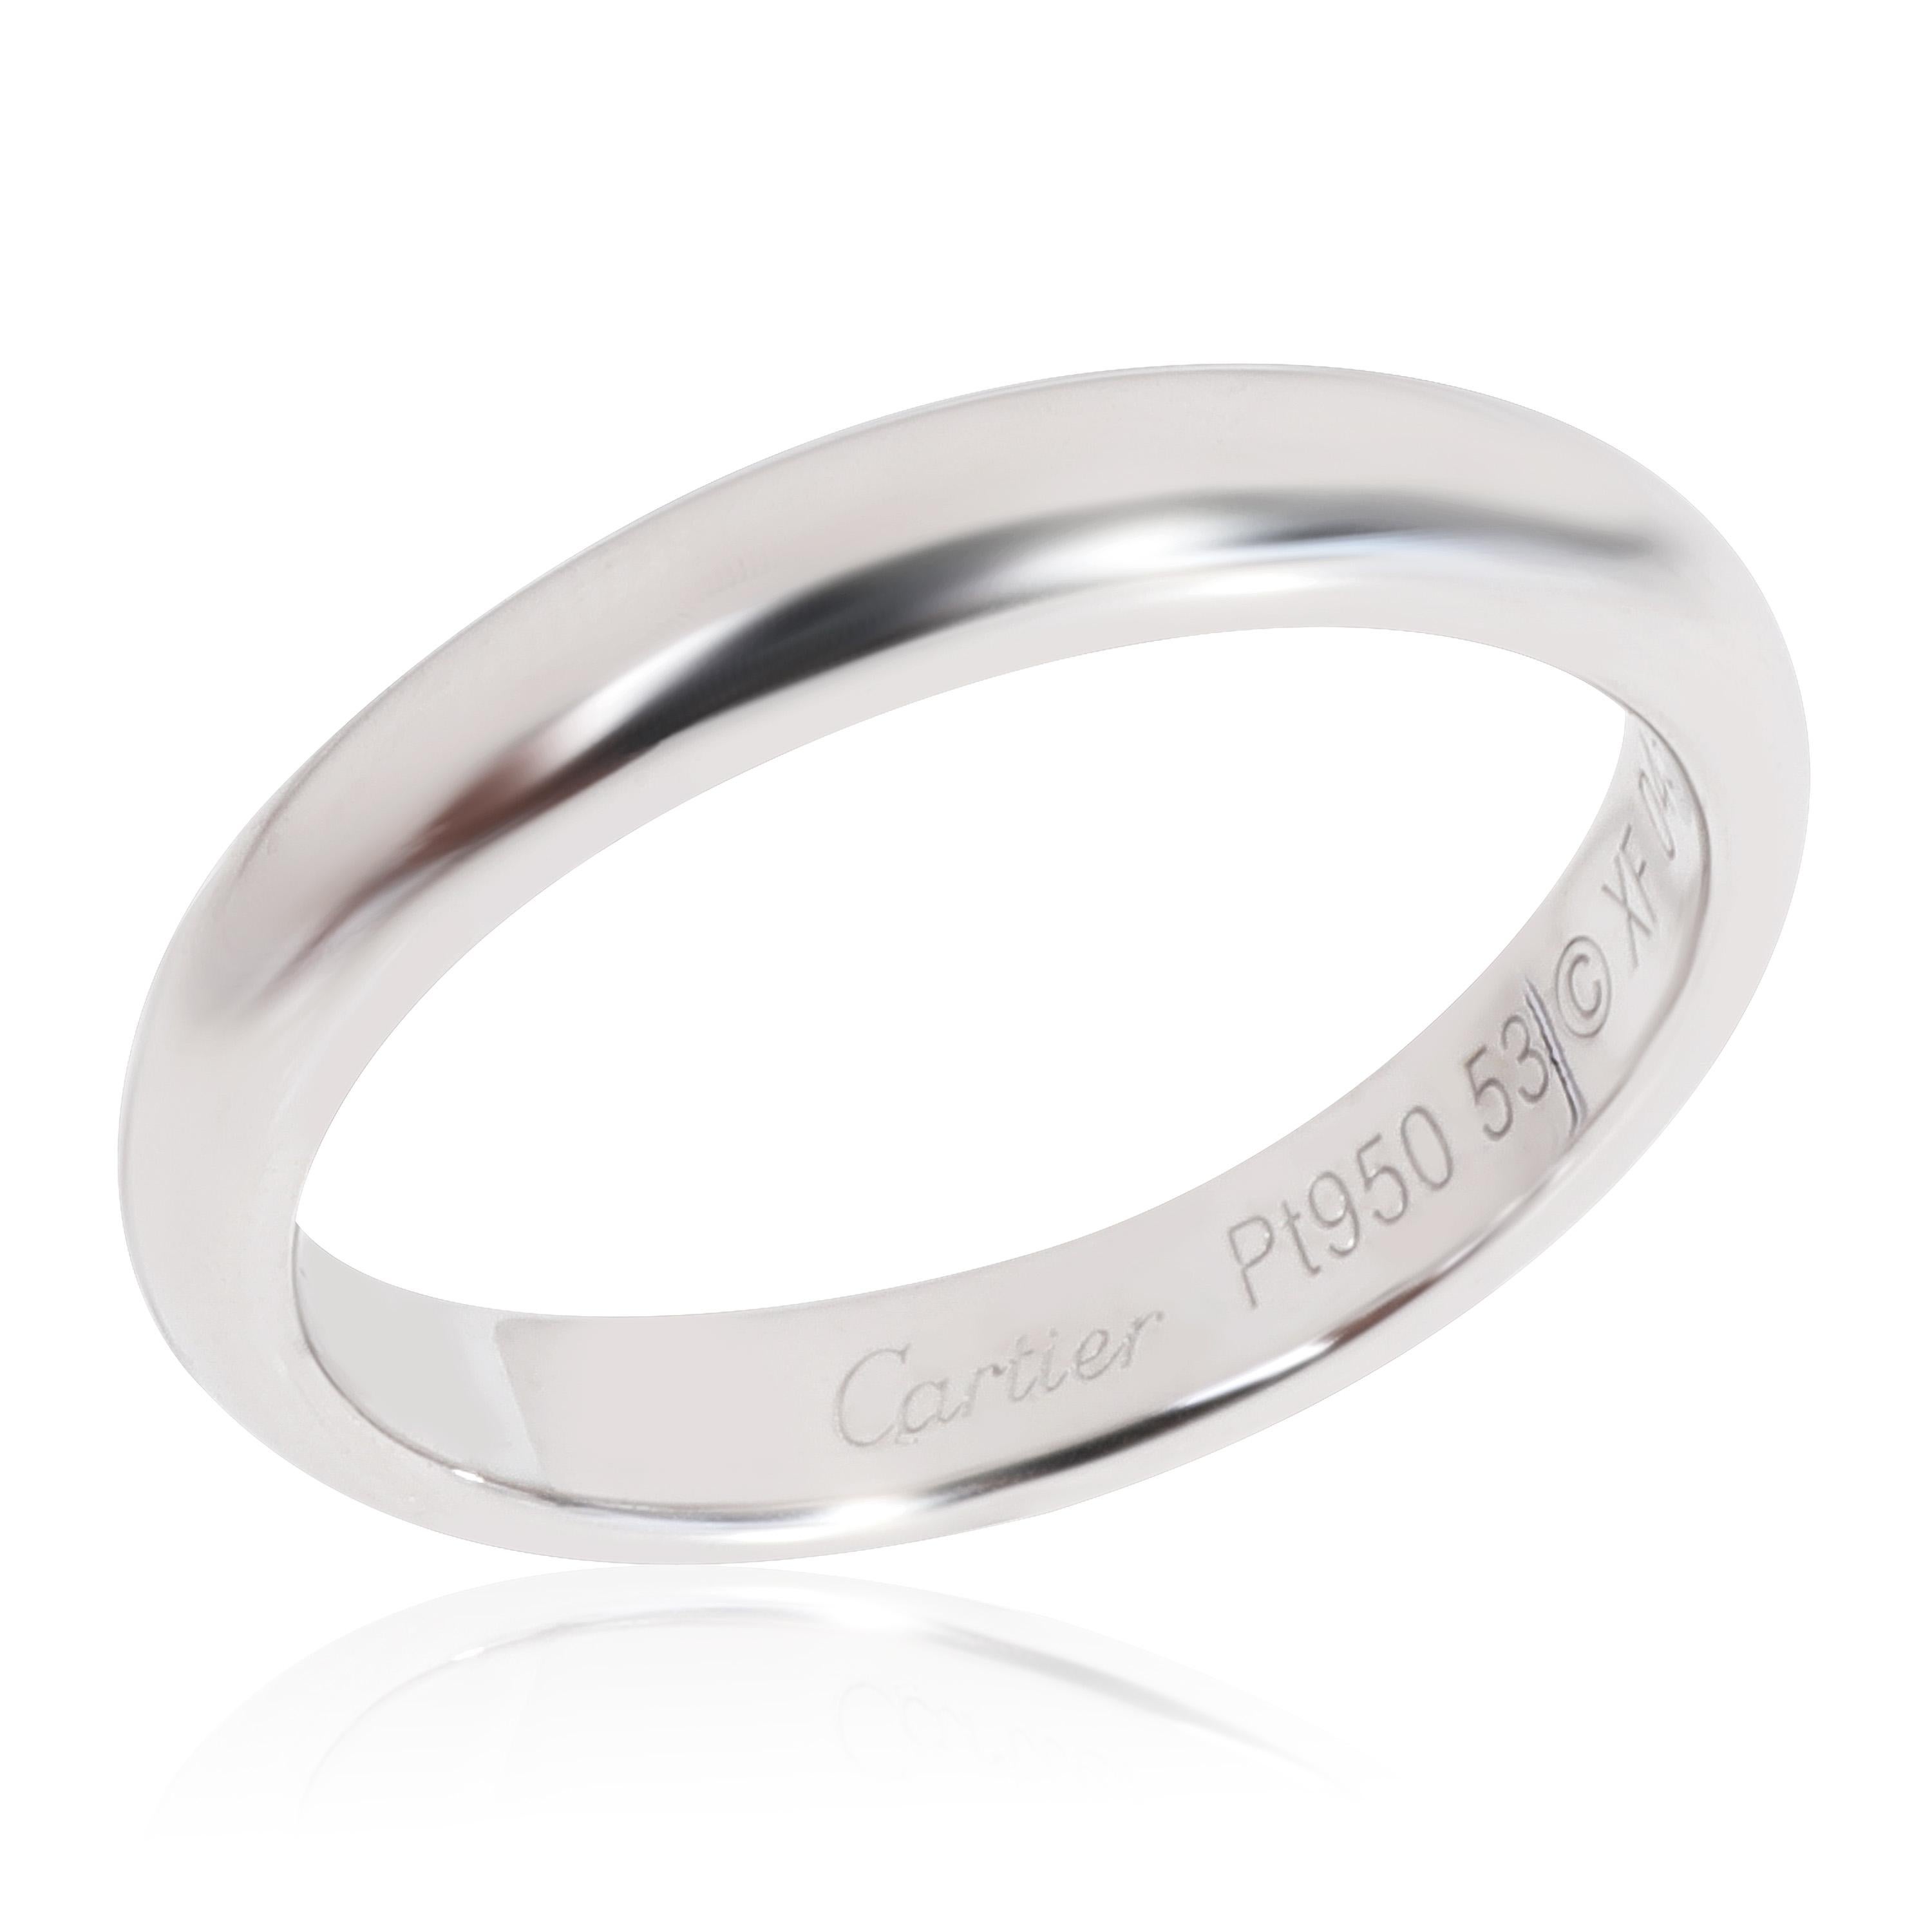 Cartier 1895 Wedding Band in Platinum

PRIMARY DETAILS
SKU: 117546
Listing Title: Cartier 1895 Wedding Band in Platinum
Condition Description: Retails for 1700 USD. In excellent condition and recently polished. Ring size is 6.25.Comes with